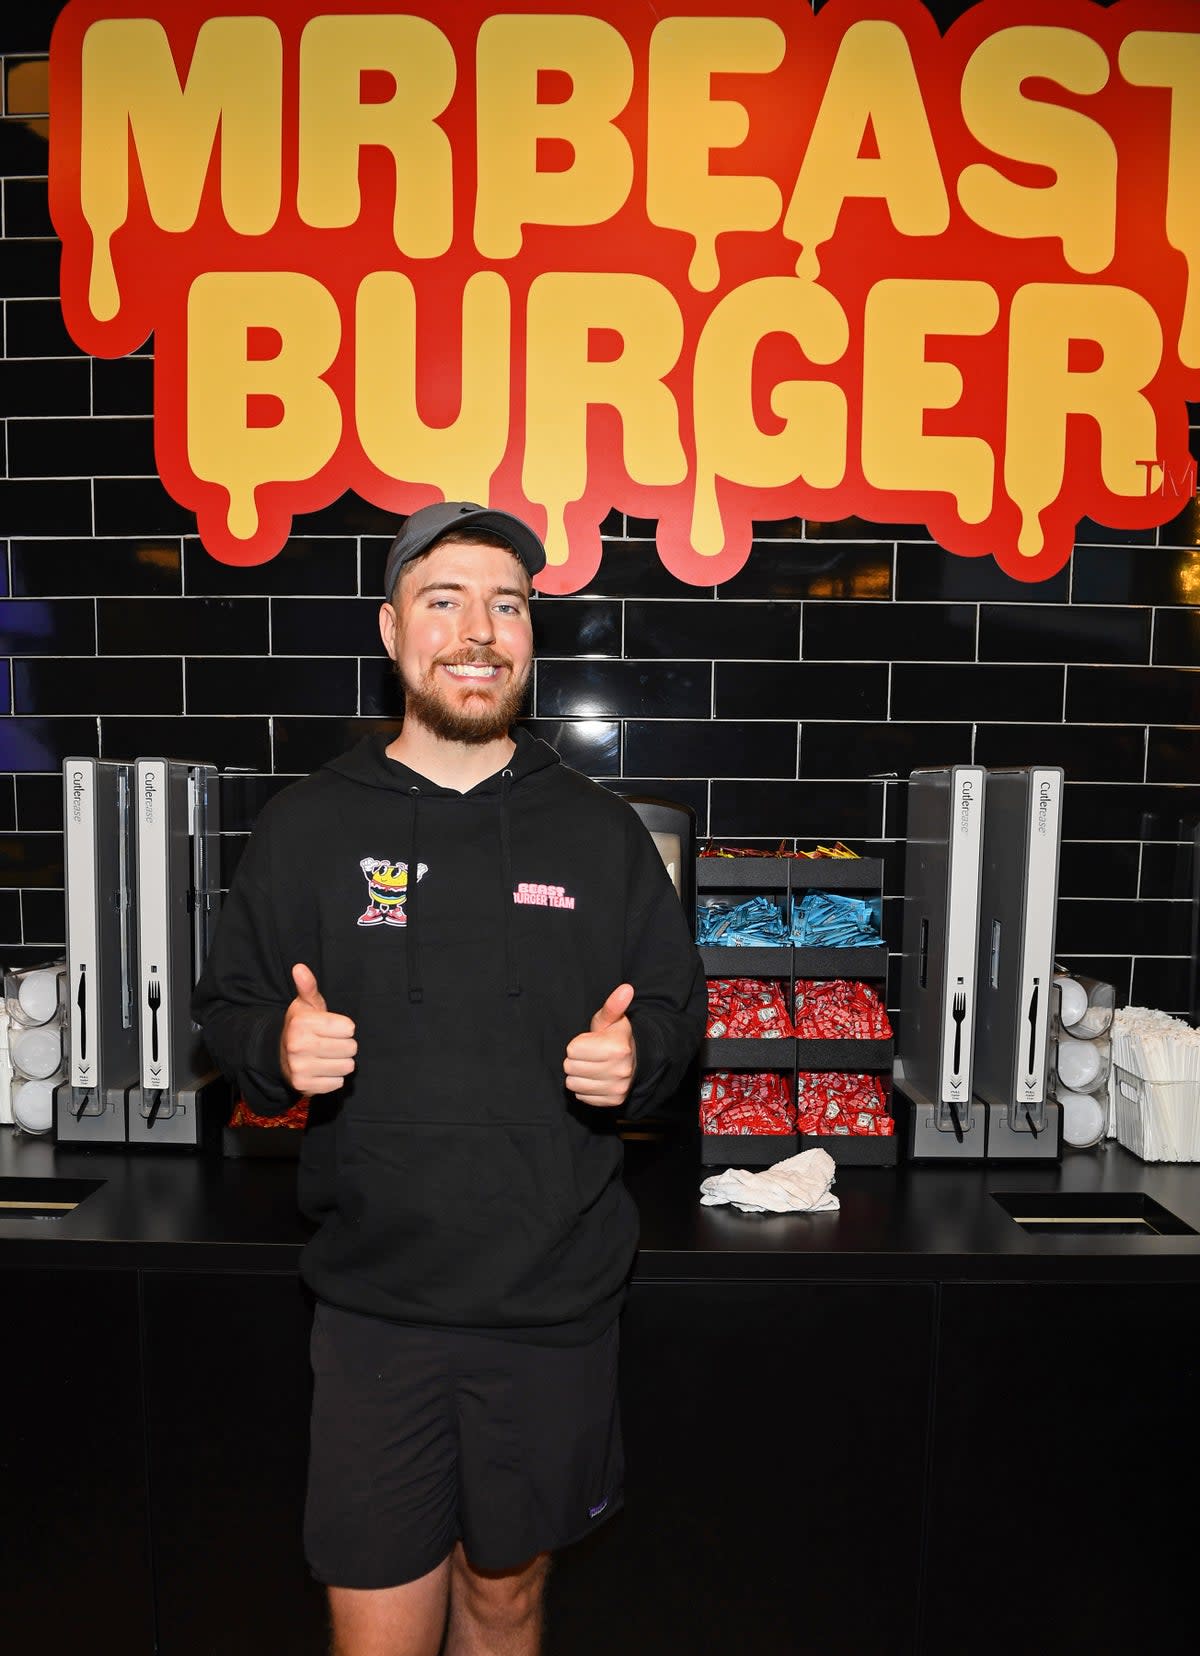  (Getty Images for MrBeast Burger)